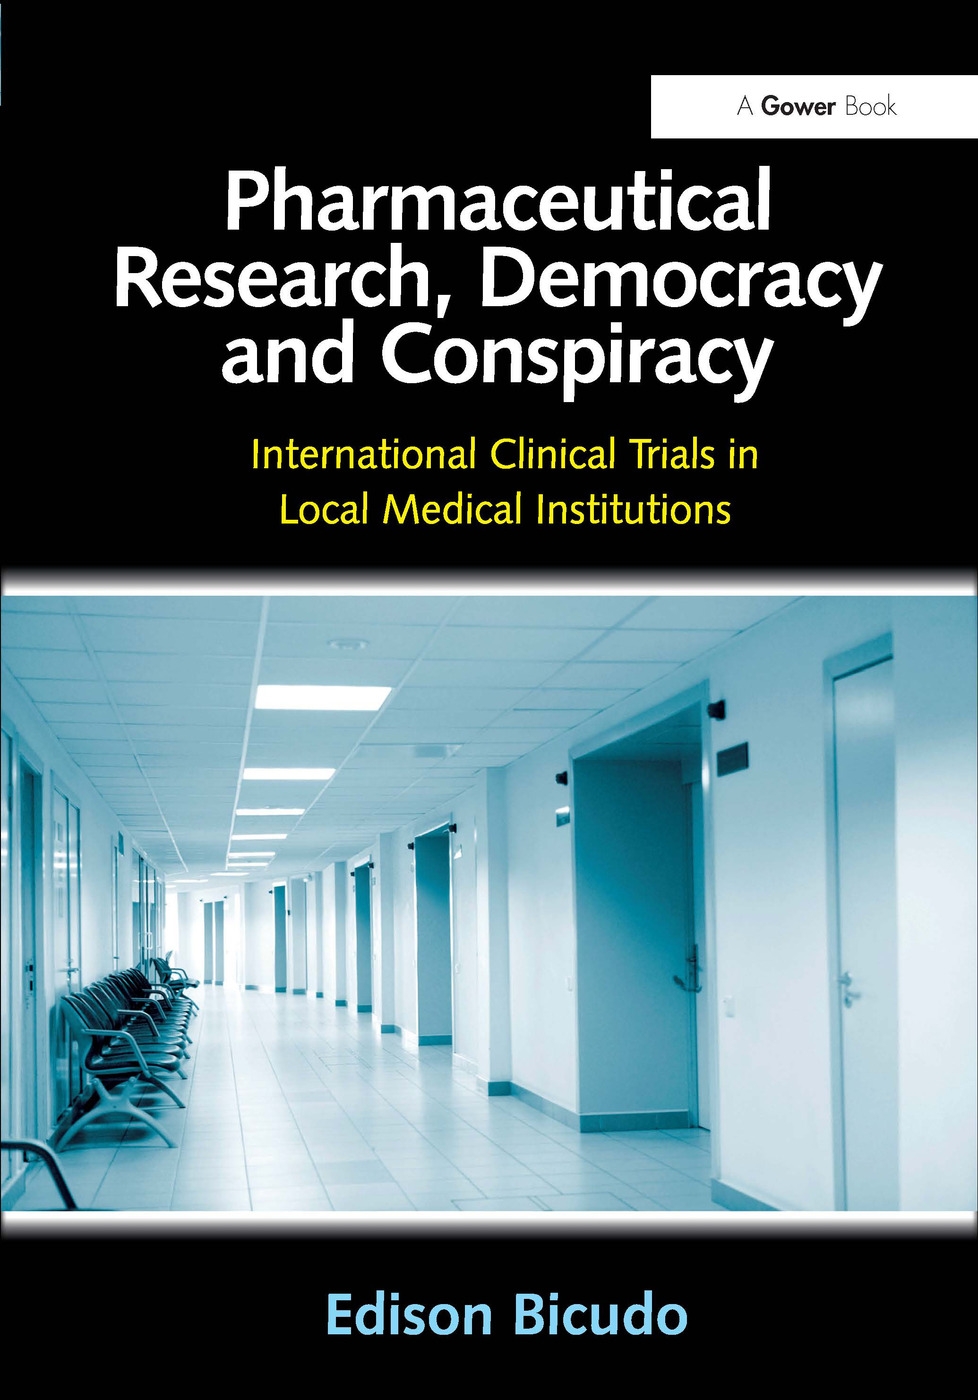 Pharmaceutical Research, Democracy and Conspiracy: International Clinical Trials in Local Medical Institutions. Edison Bicudo